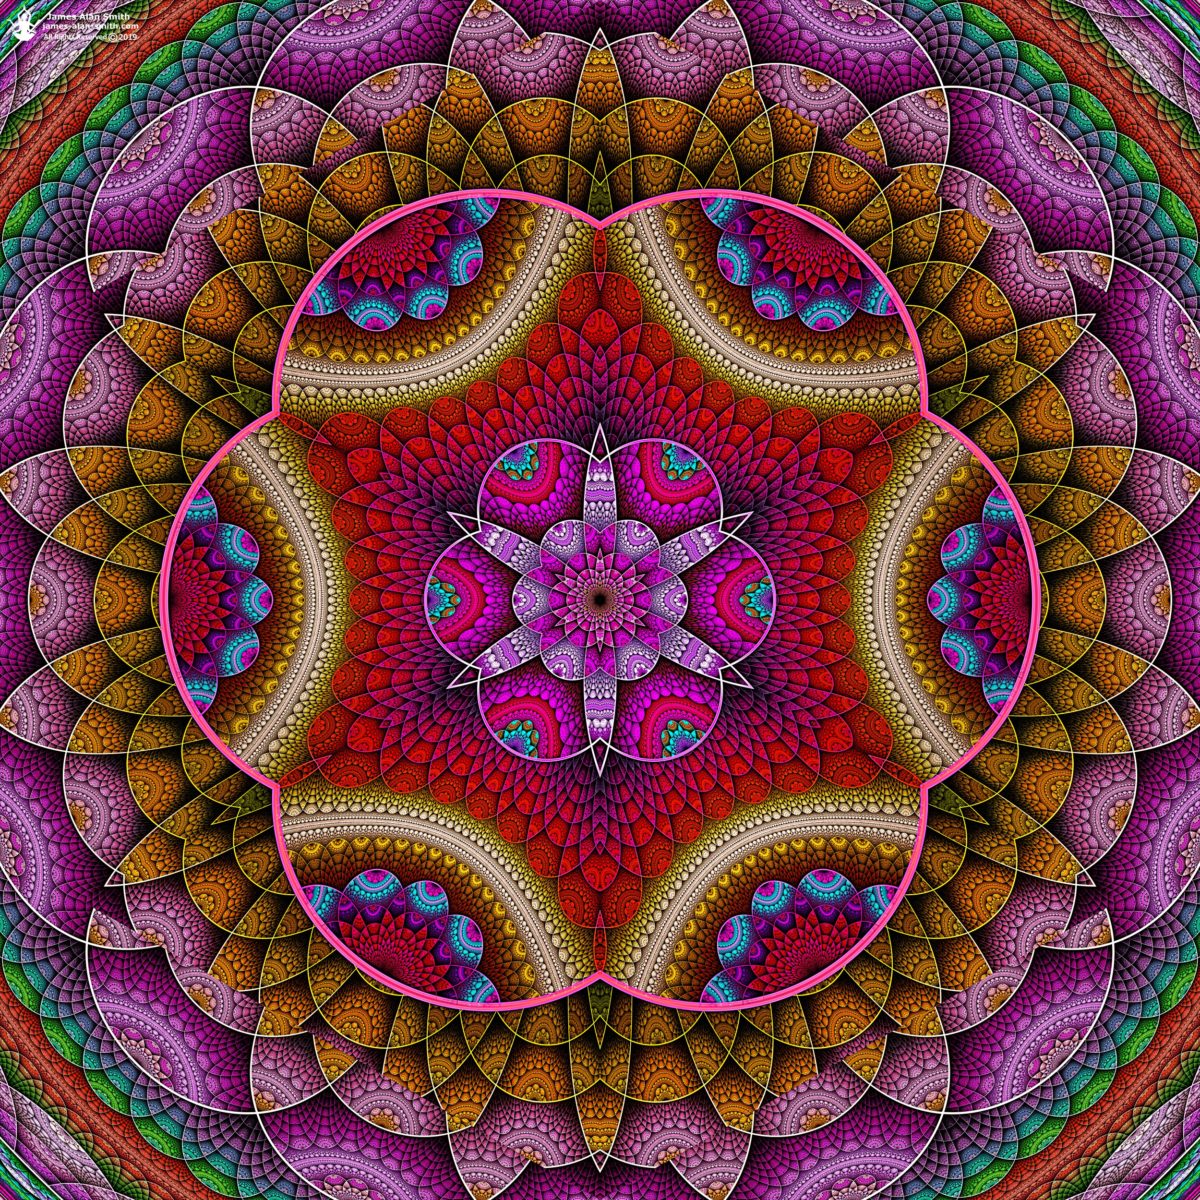 Sequence of Color Mandala: Artwork by James Alan Smith